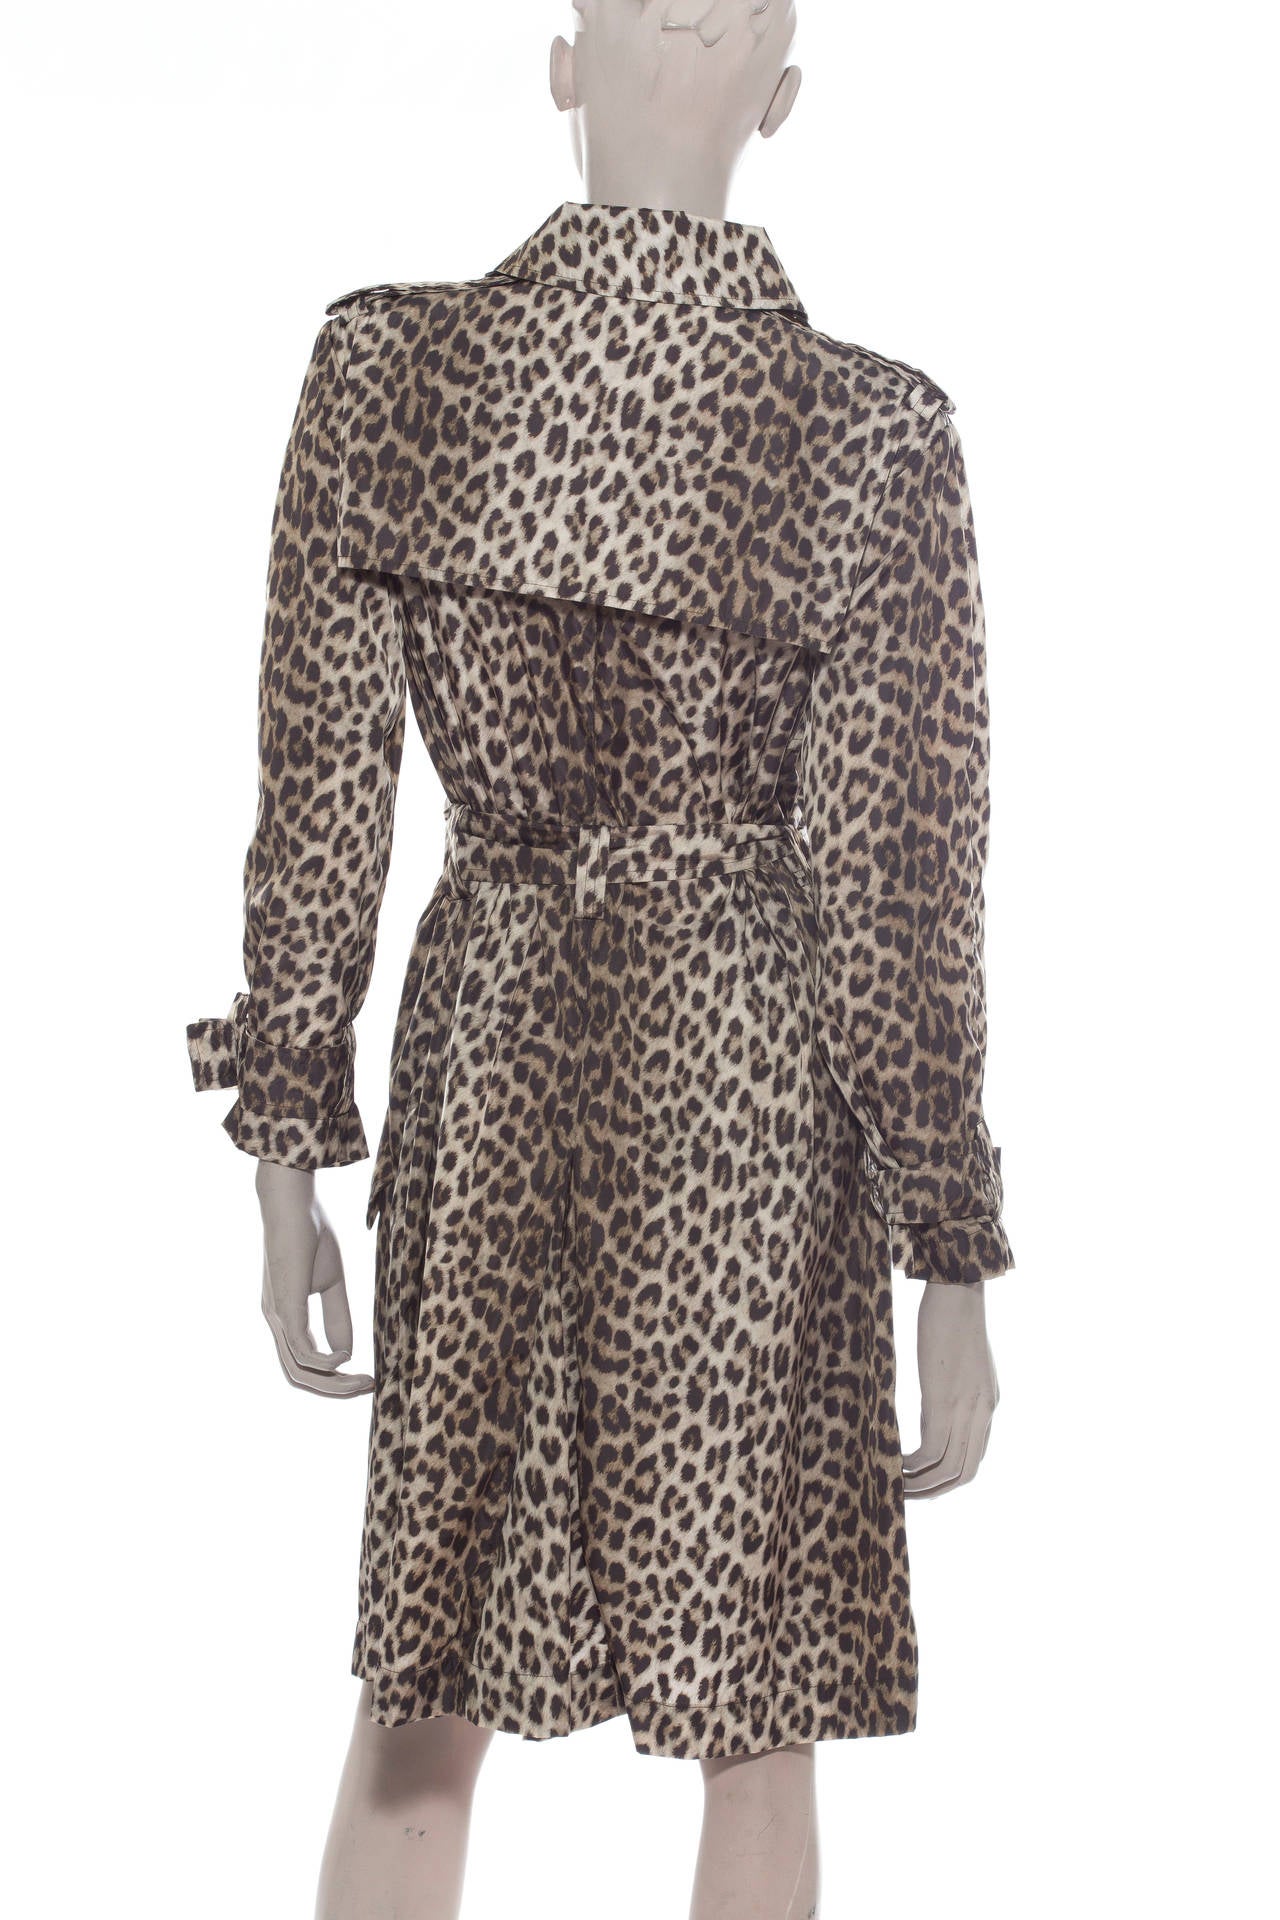 Lanvin pre- fall 2010, button front,  jaguar print  trench coat, two front pockets, epaulets with self belt.